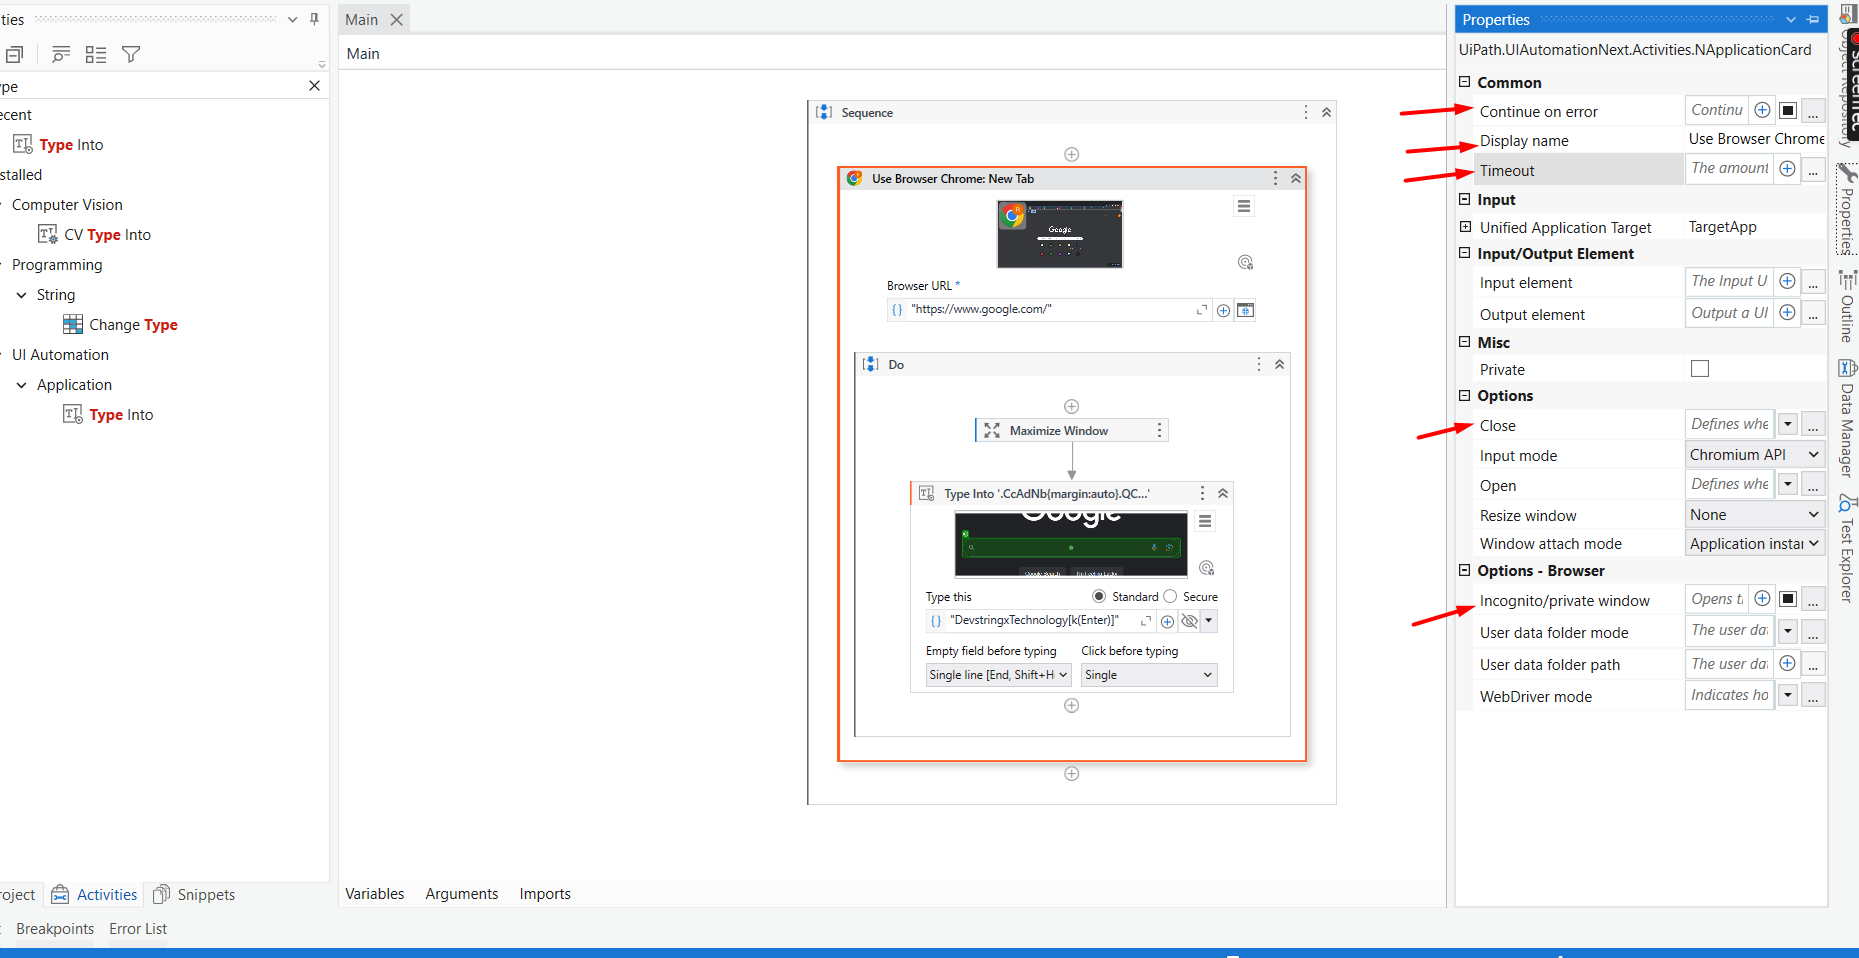 image of browser activity UiPath